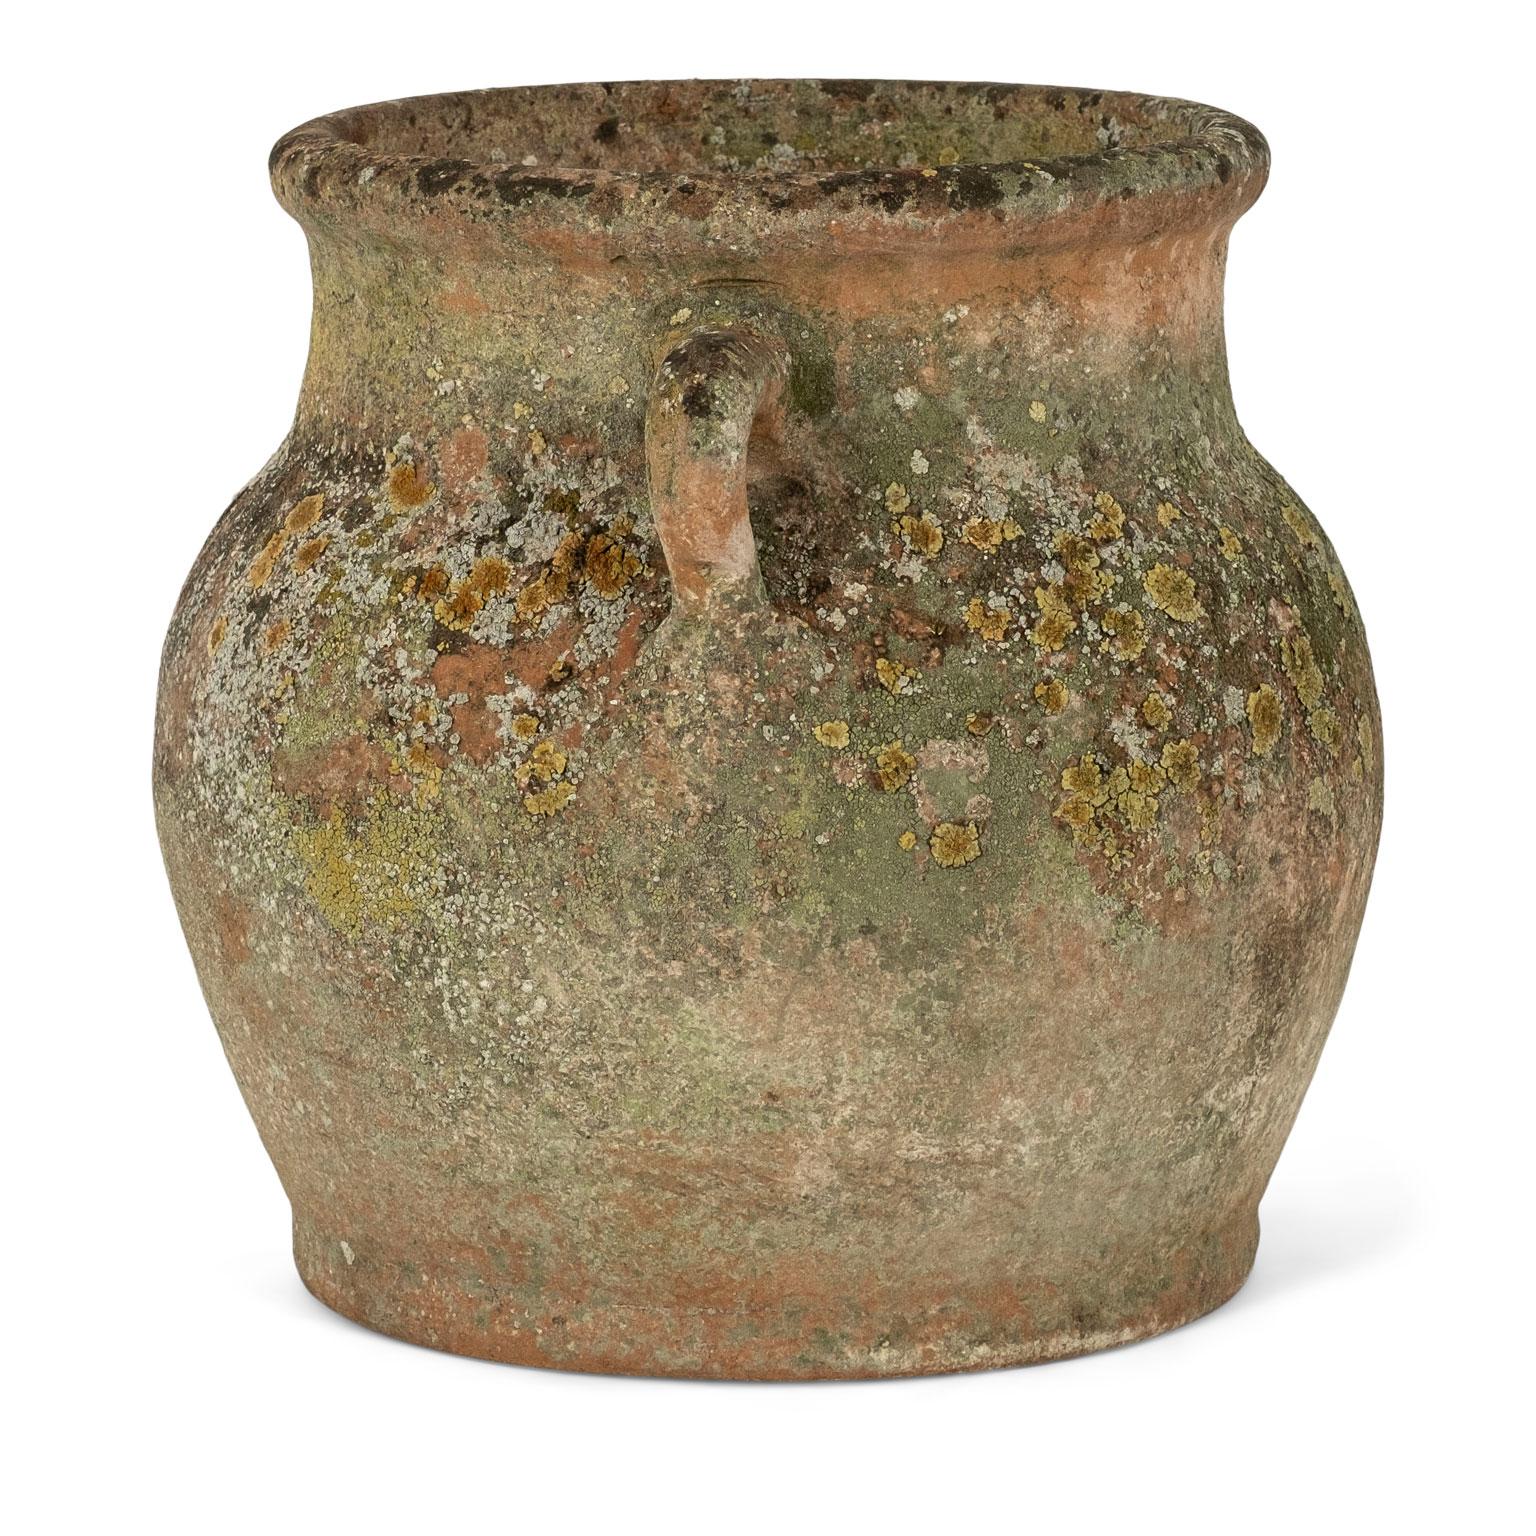 Antique terracotta pot with handles. Three available (see last image). Sold individually and priced $1,200 each.